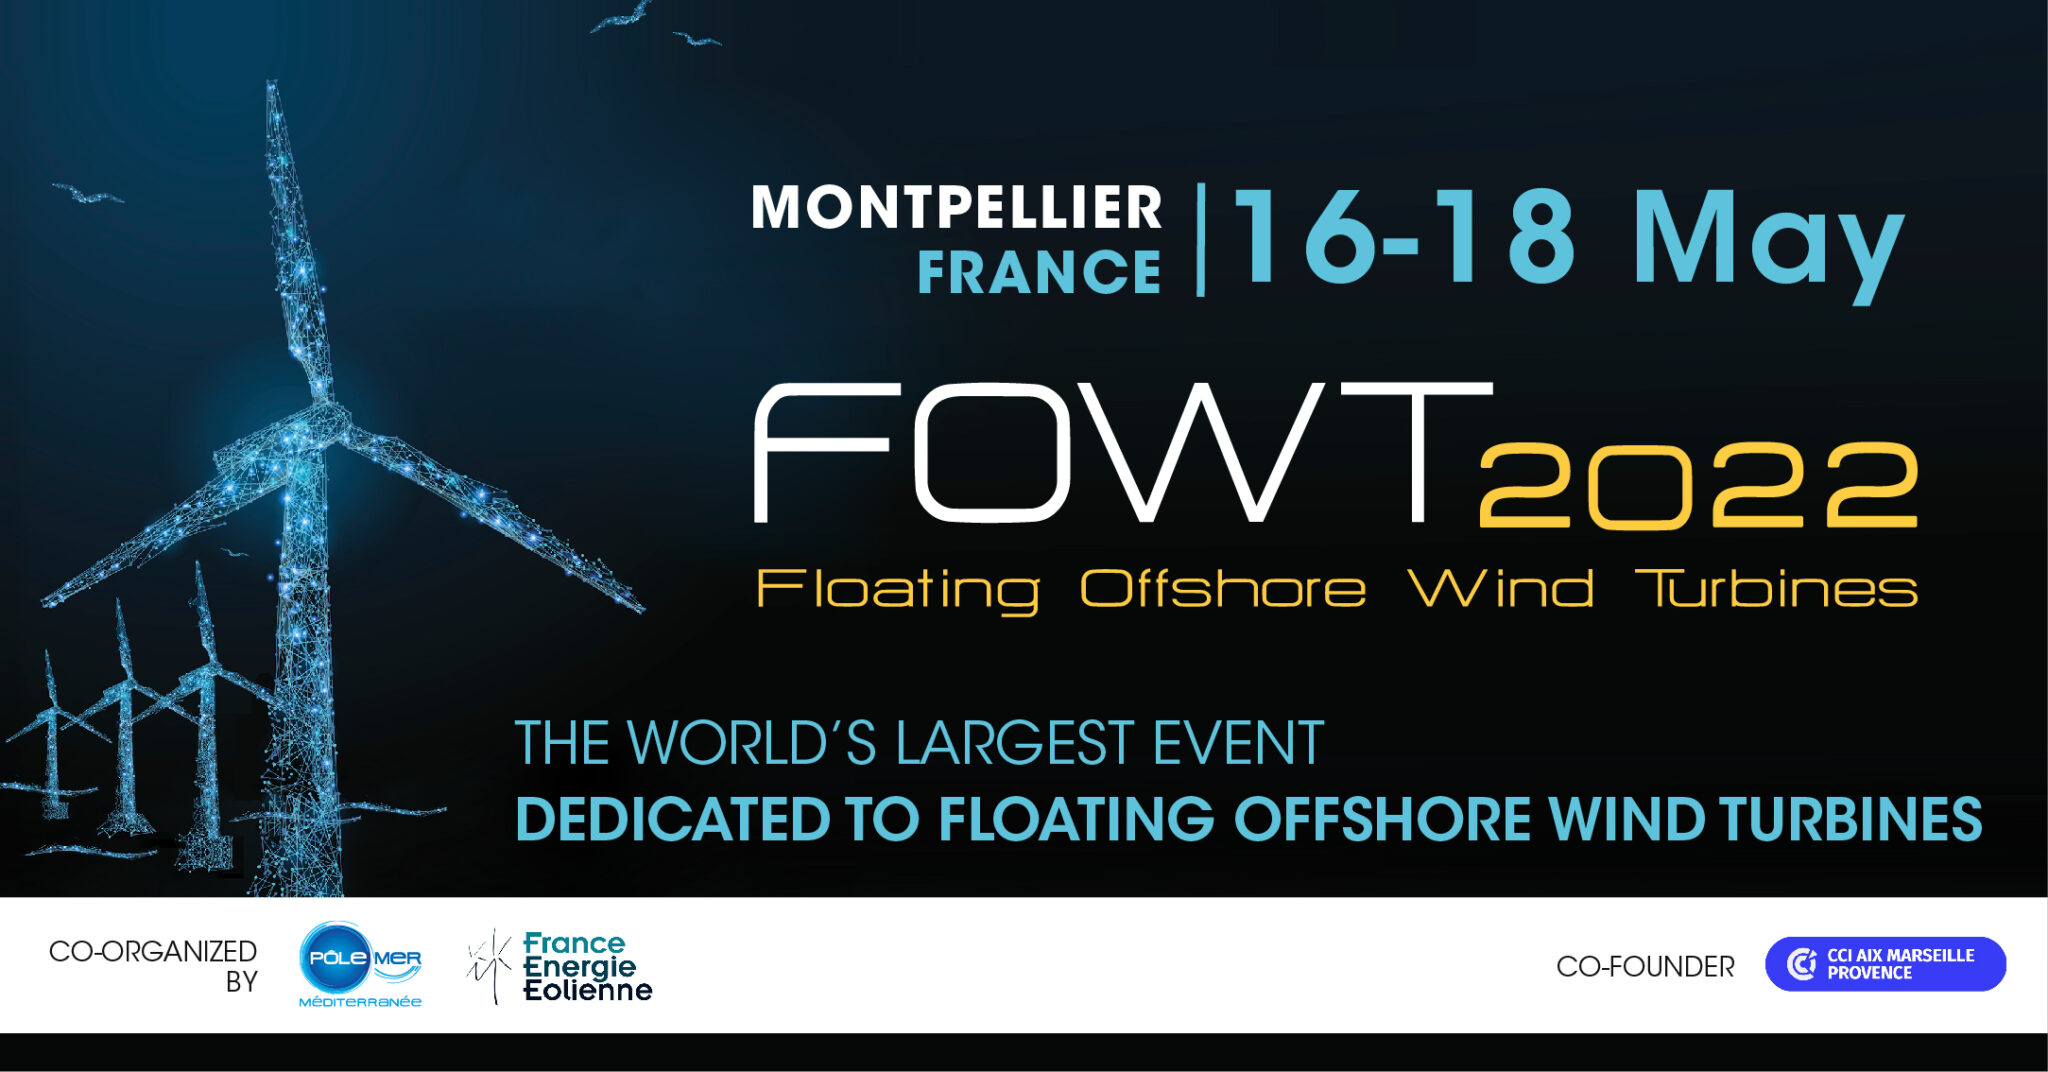 FOWT – Floating Offshore Wind Turbine